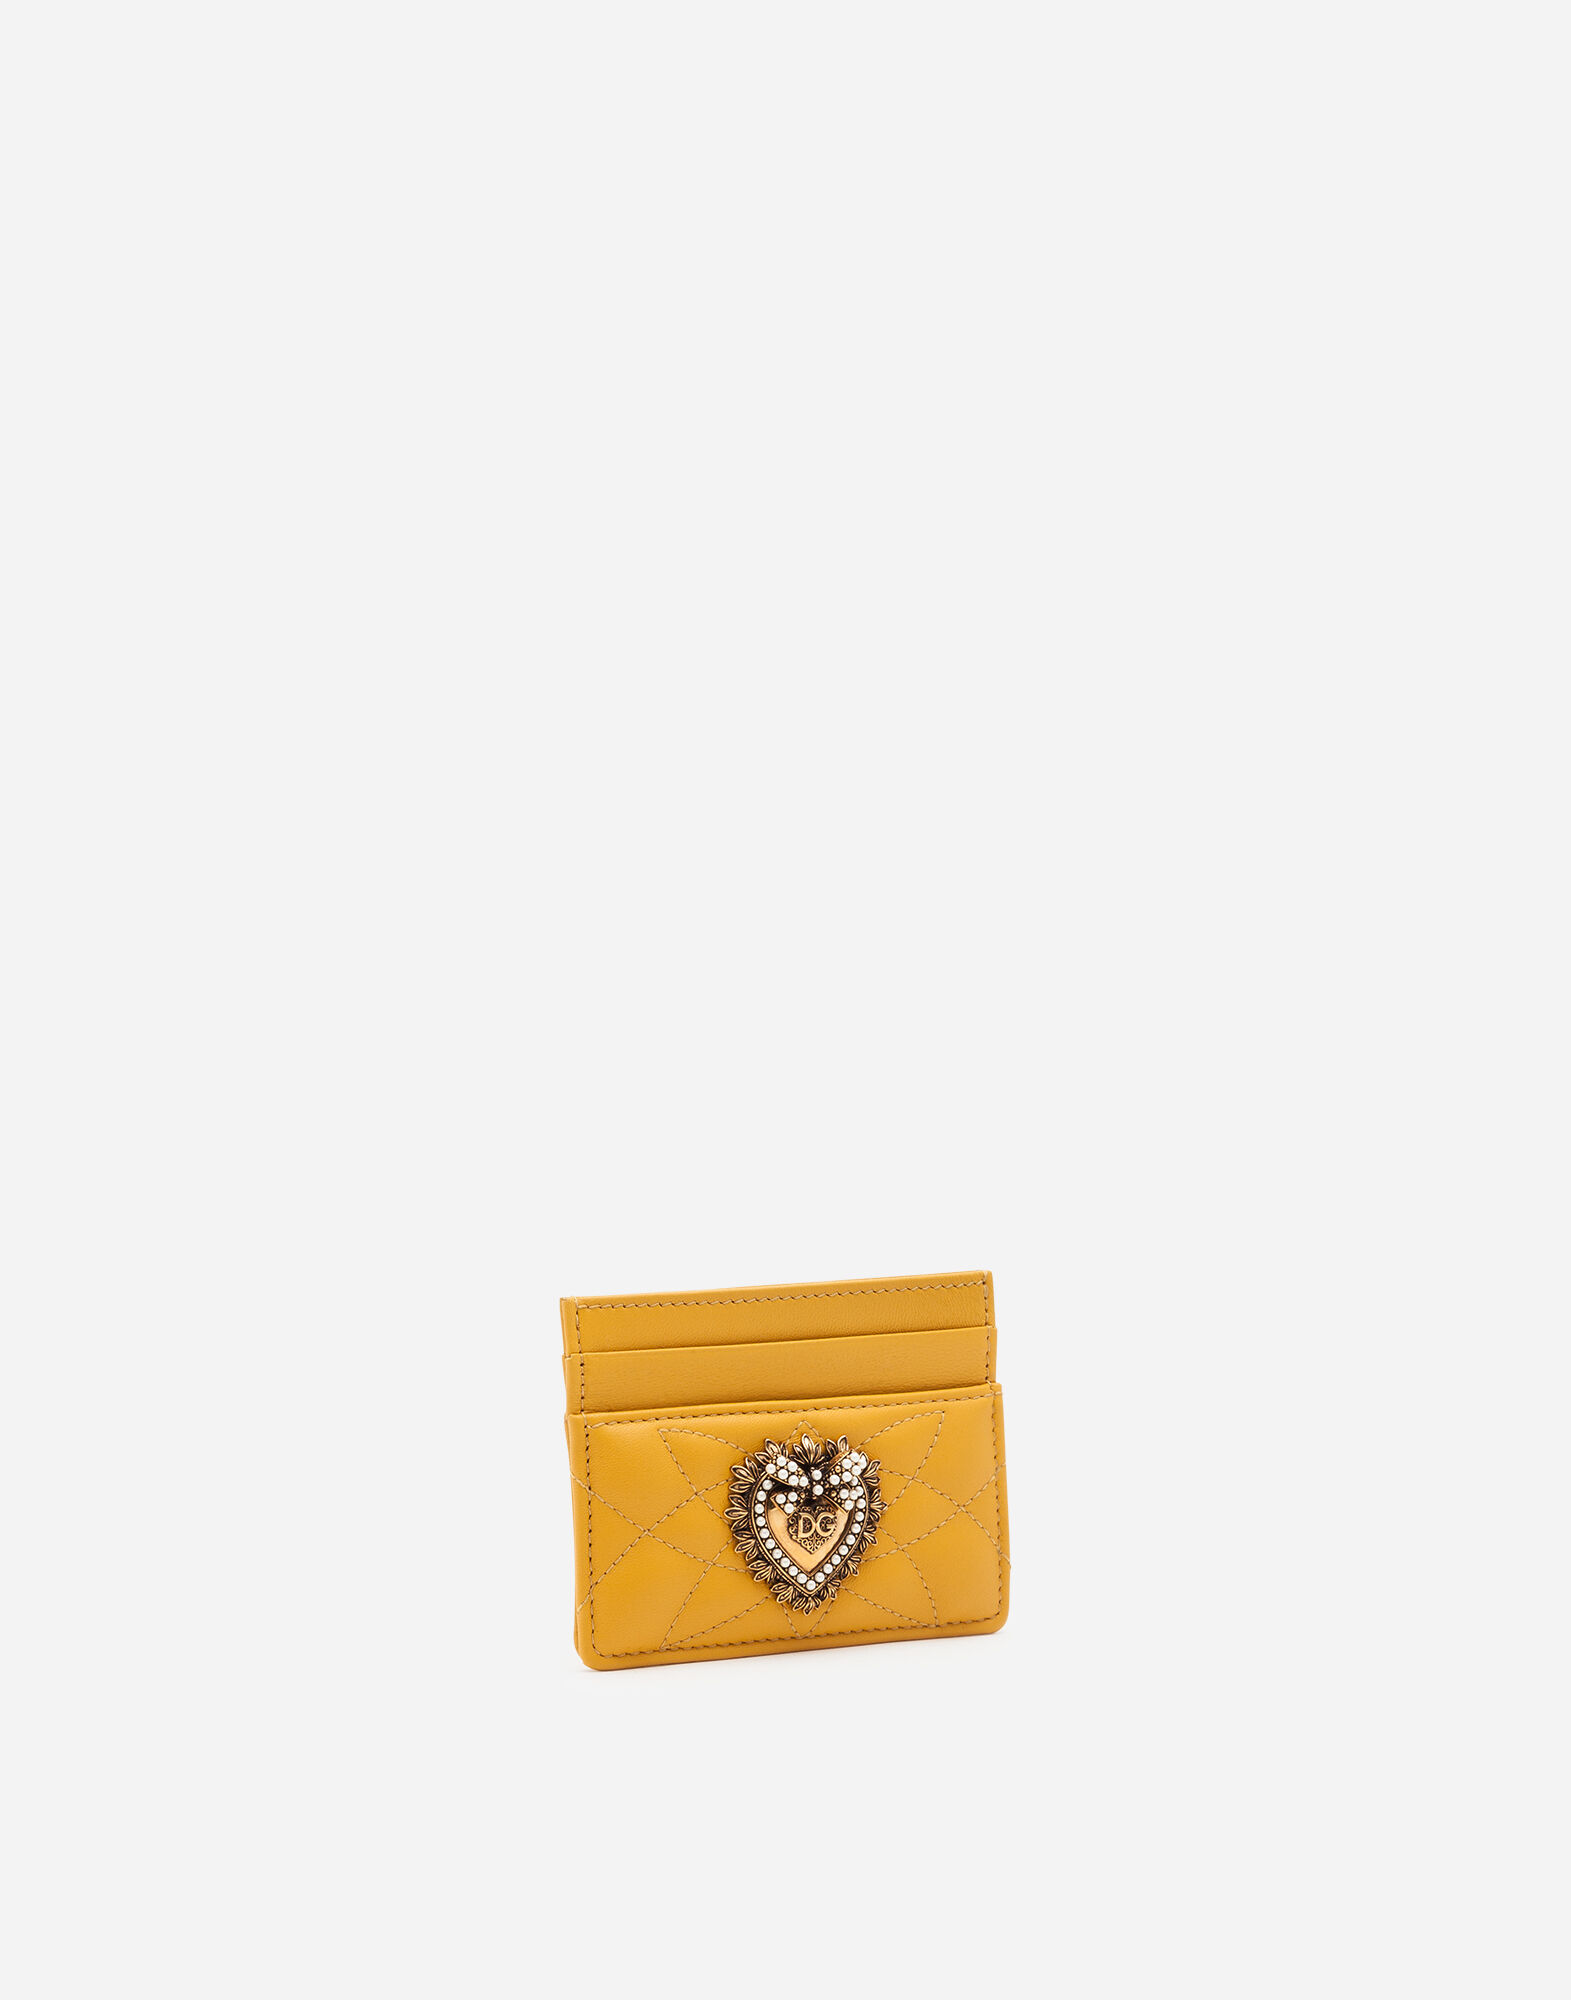 Devotion credit card holder in YELLOW for | Dolce&Gabbana® US